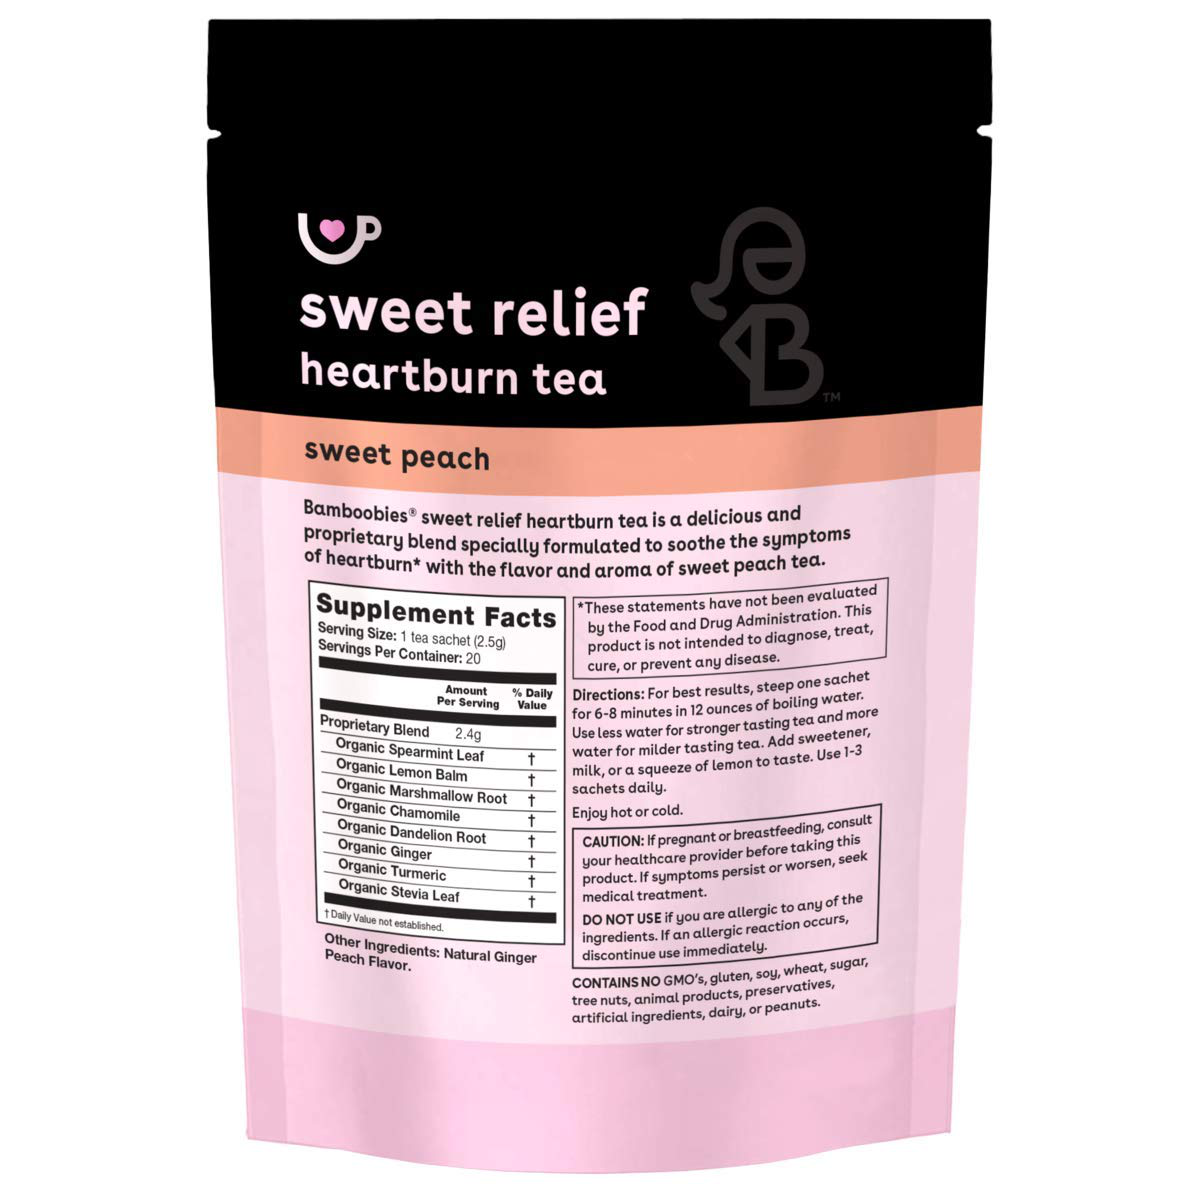 Bamboobies Women’s Lactation Support Drink Mix, Stawberry, Supplement Packets for Breastfeeding, 10 Packets